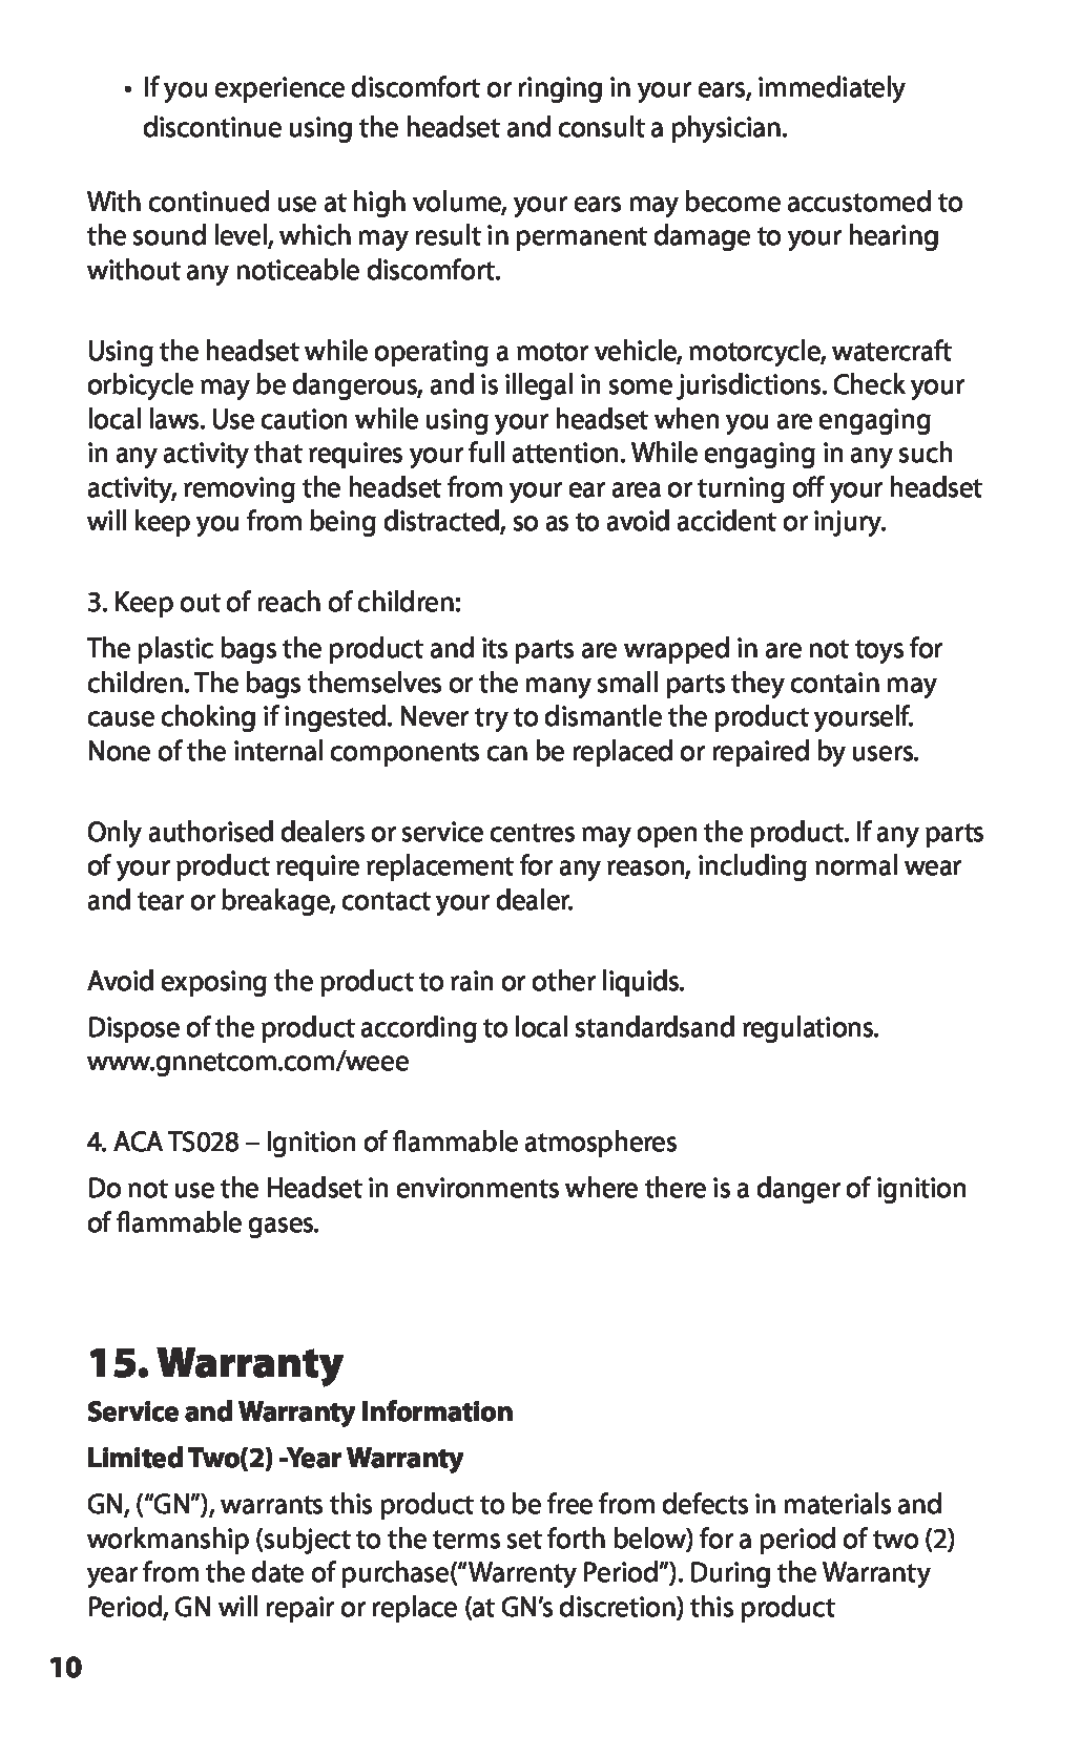 Lennox Hearth BT2010 manual Service and Warranty Information, Limited Two2 -YearWarranty 